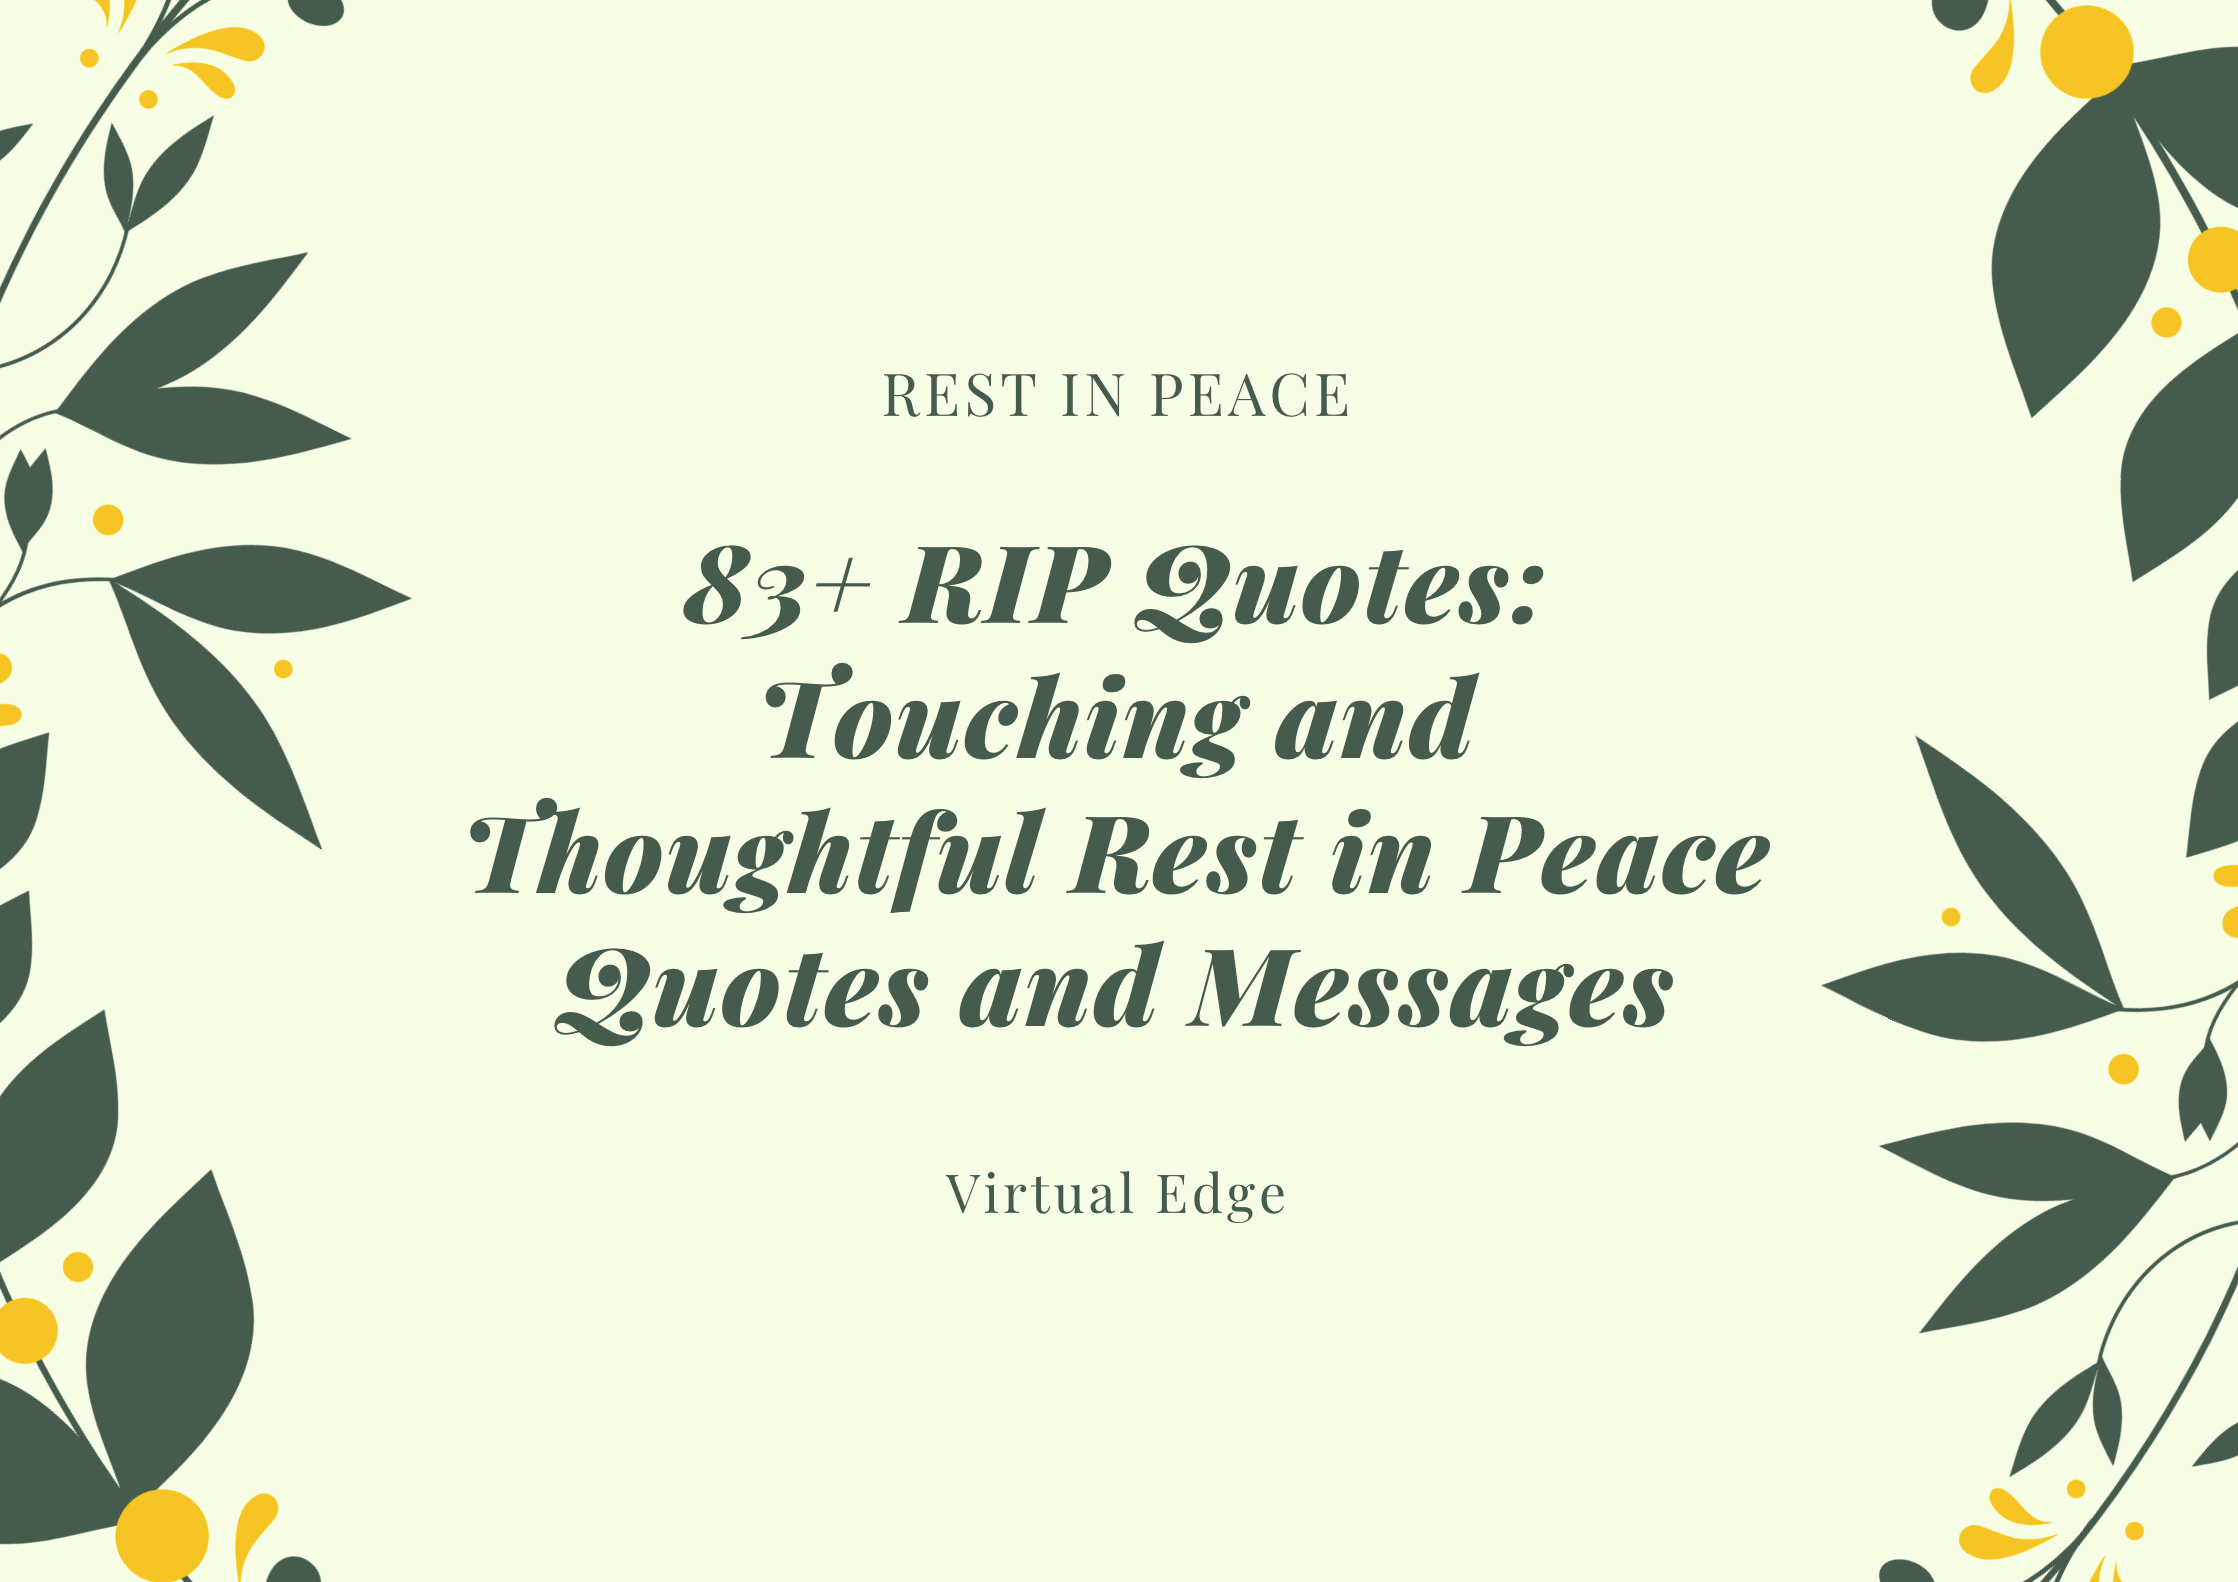 83+ RIP Quotes: Touching and Thoughtful Rest in Peace Quotes and Messages